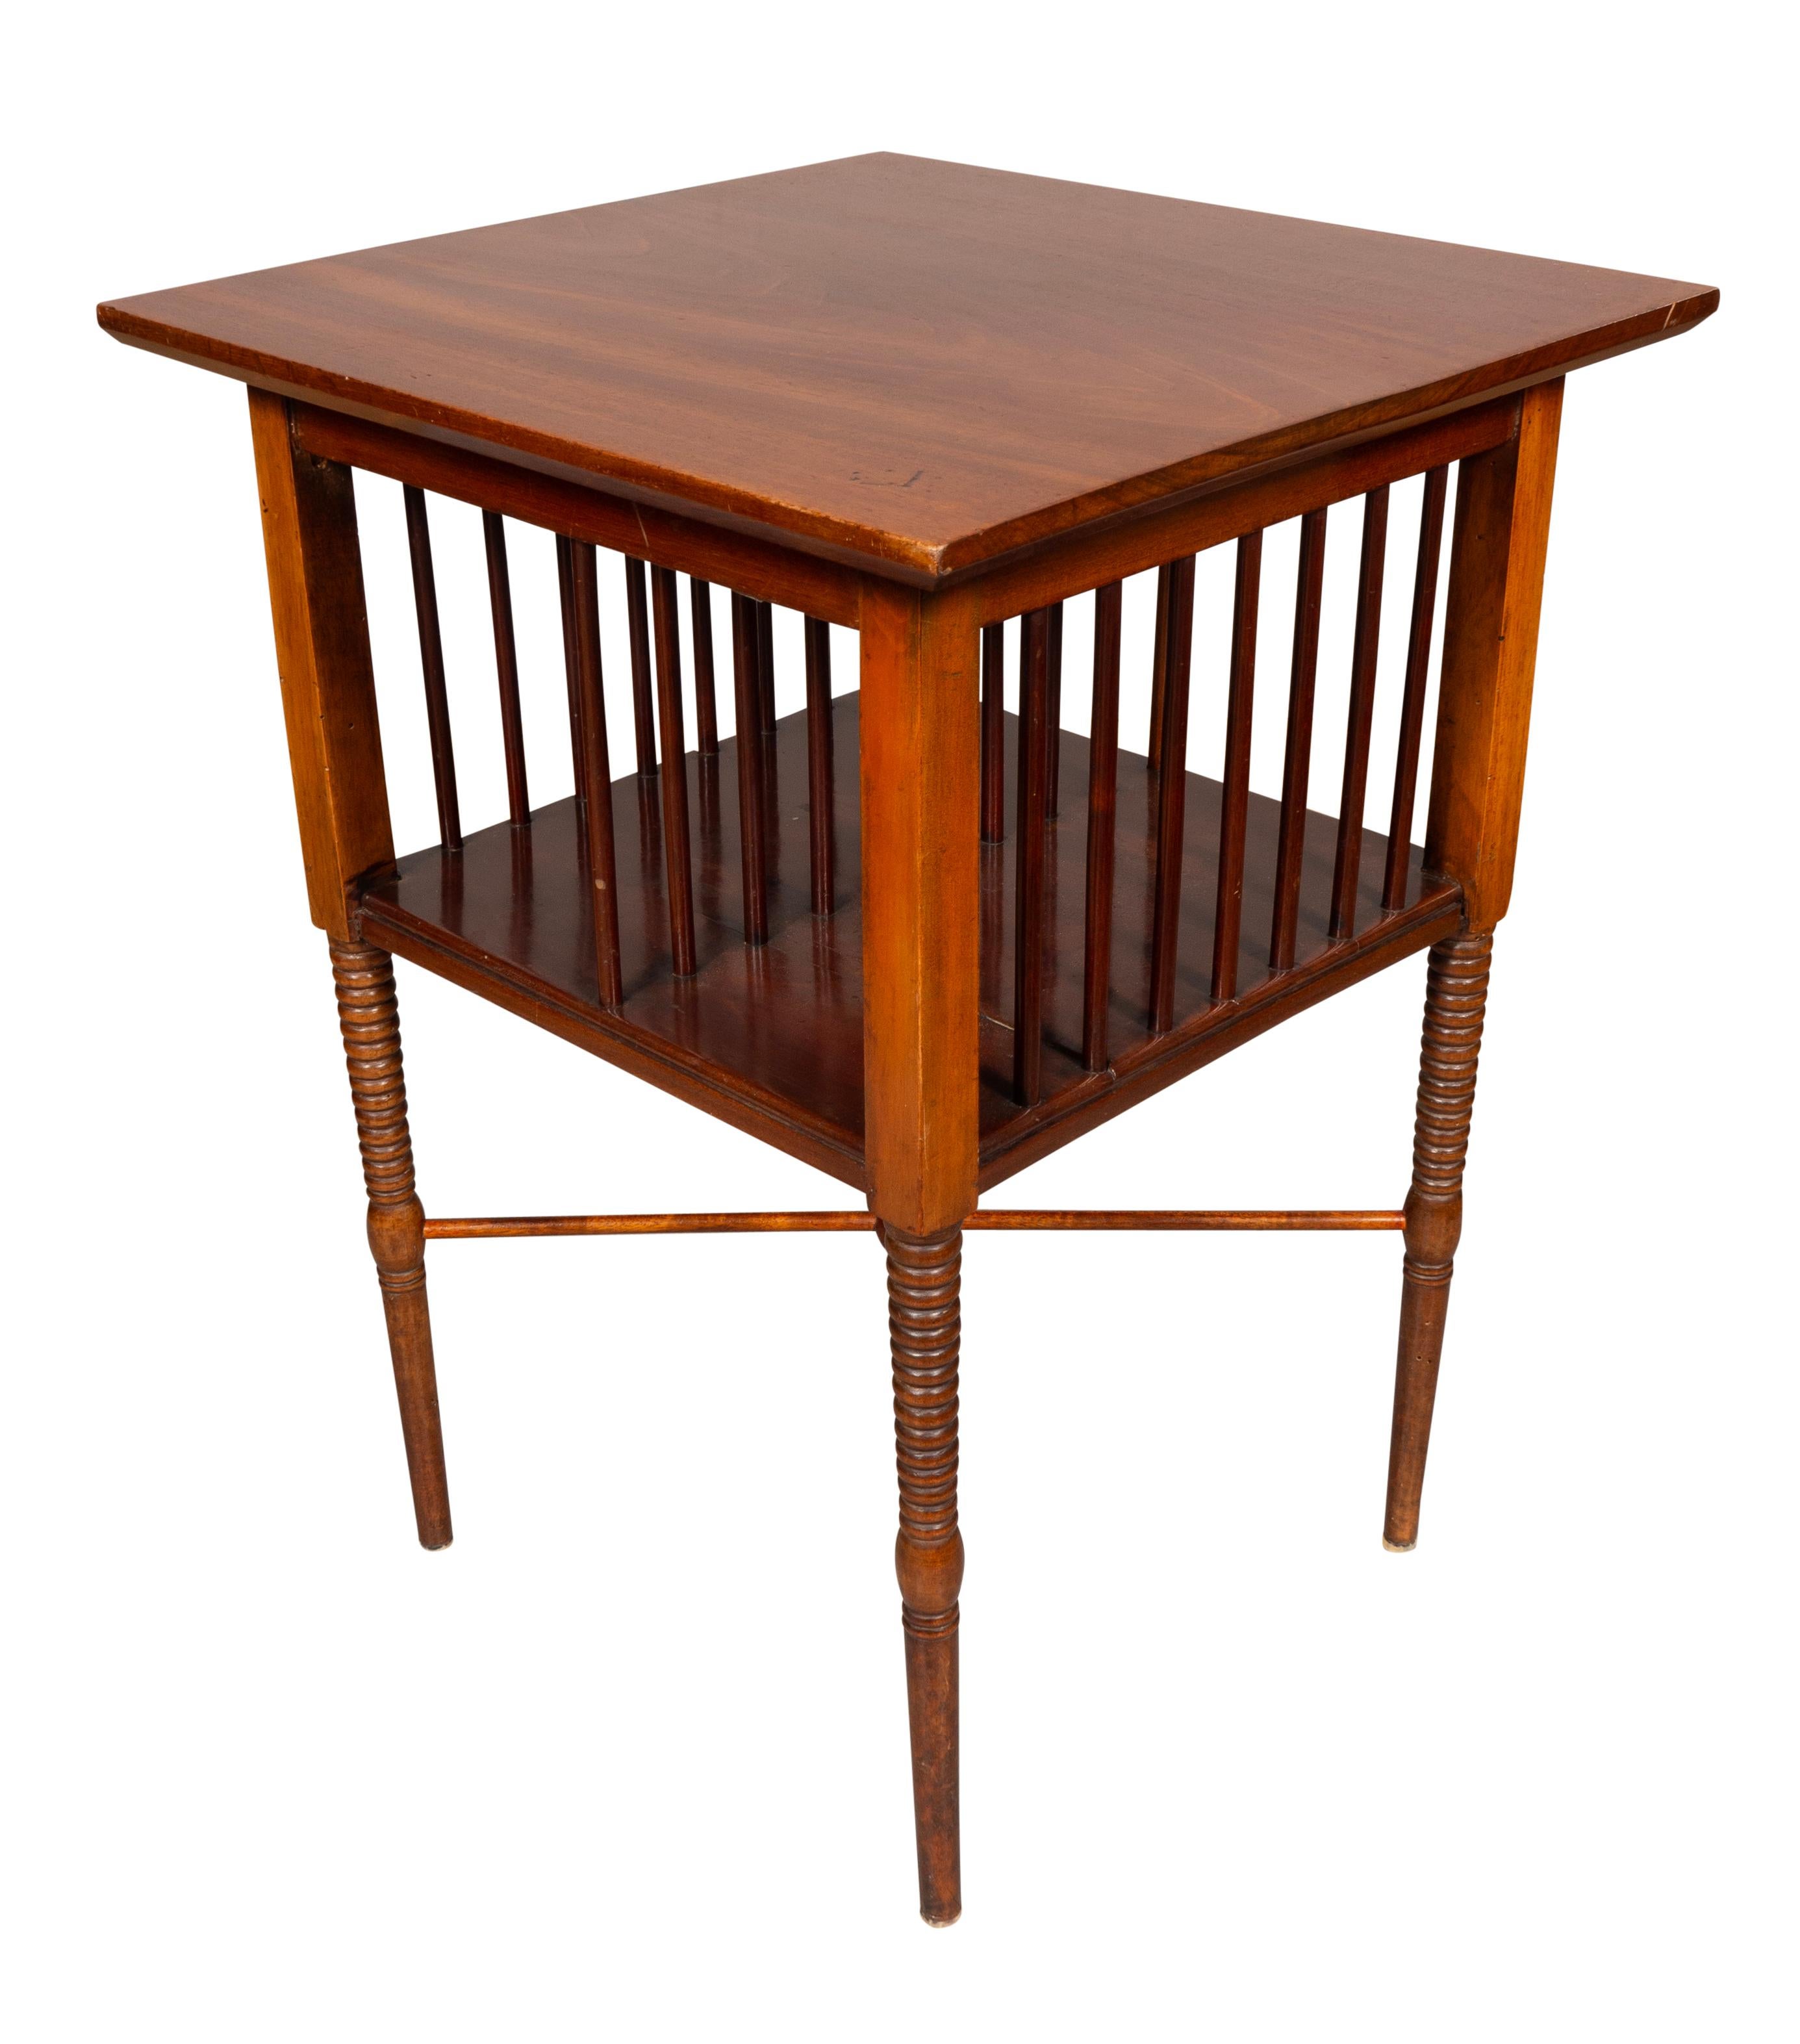 English Aesthetic Mahogany Table Attributed To Godwin For Sale 1